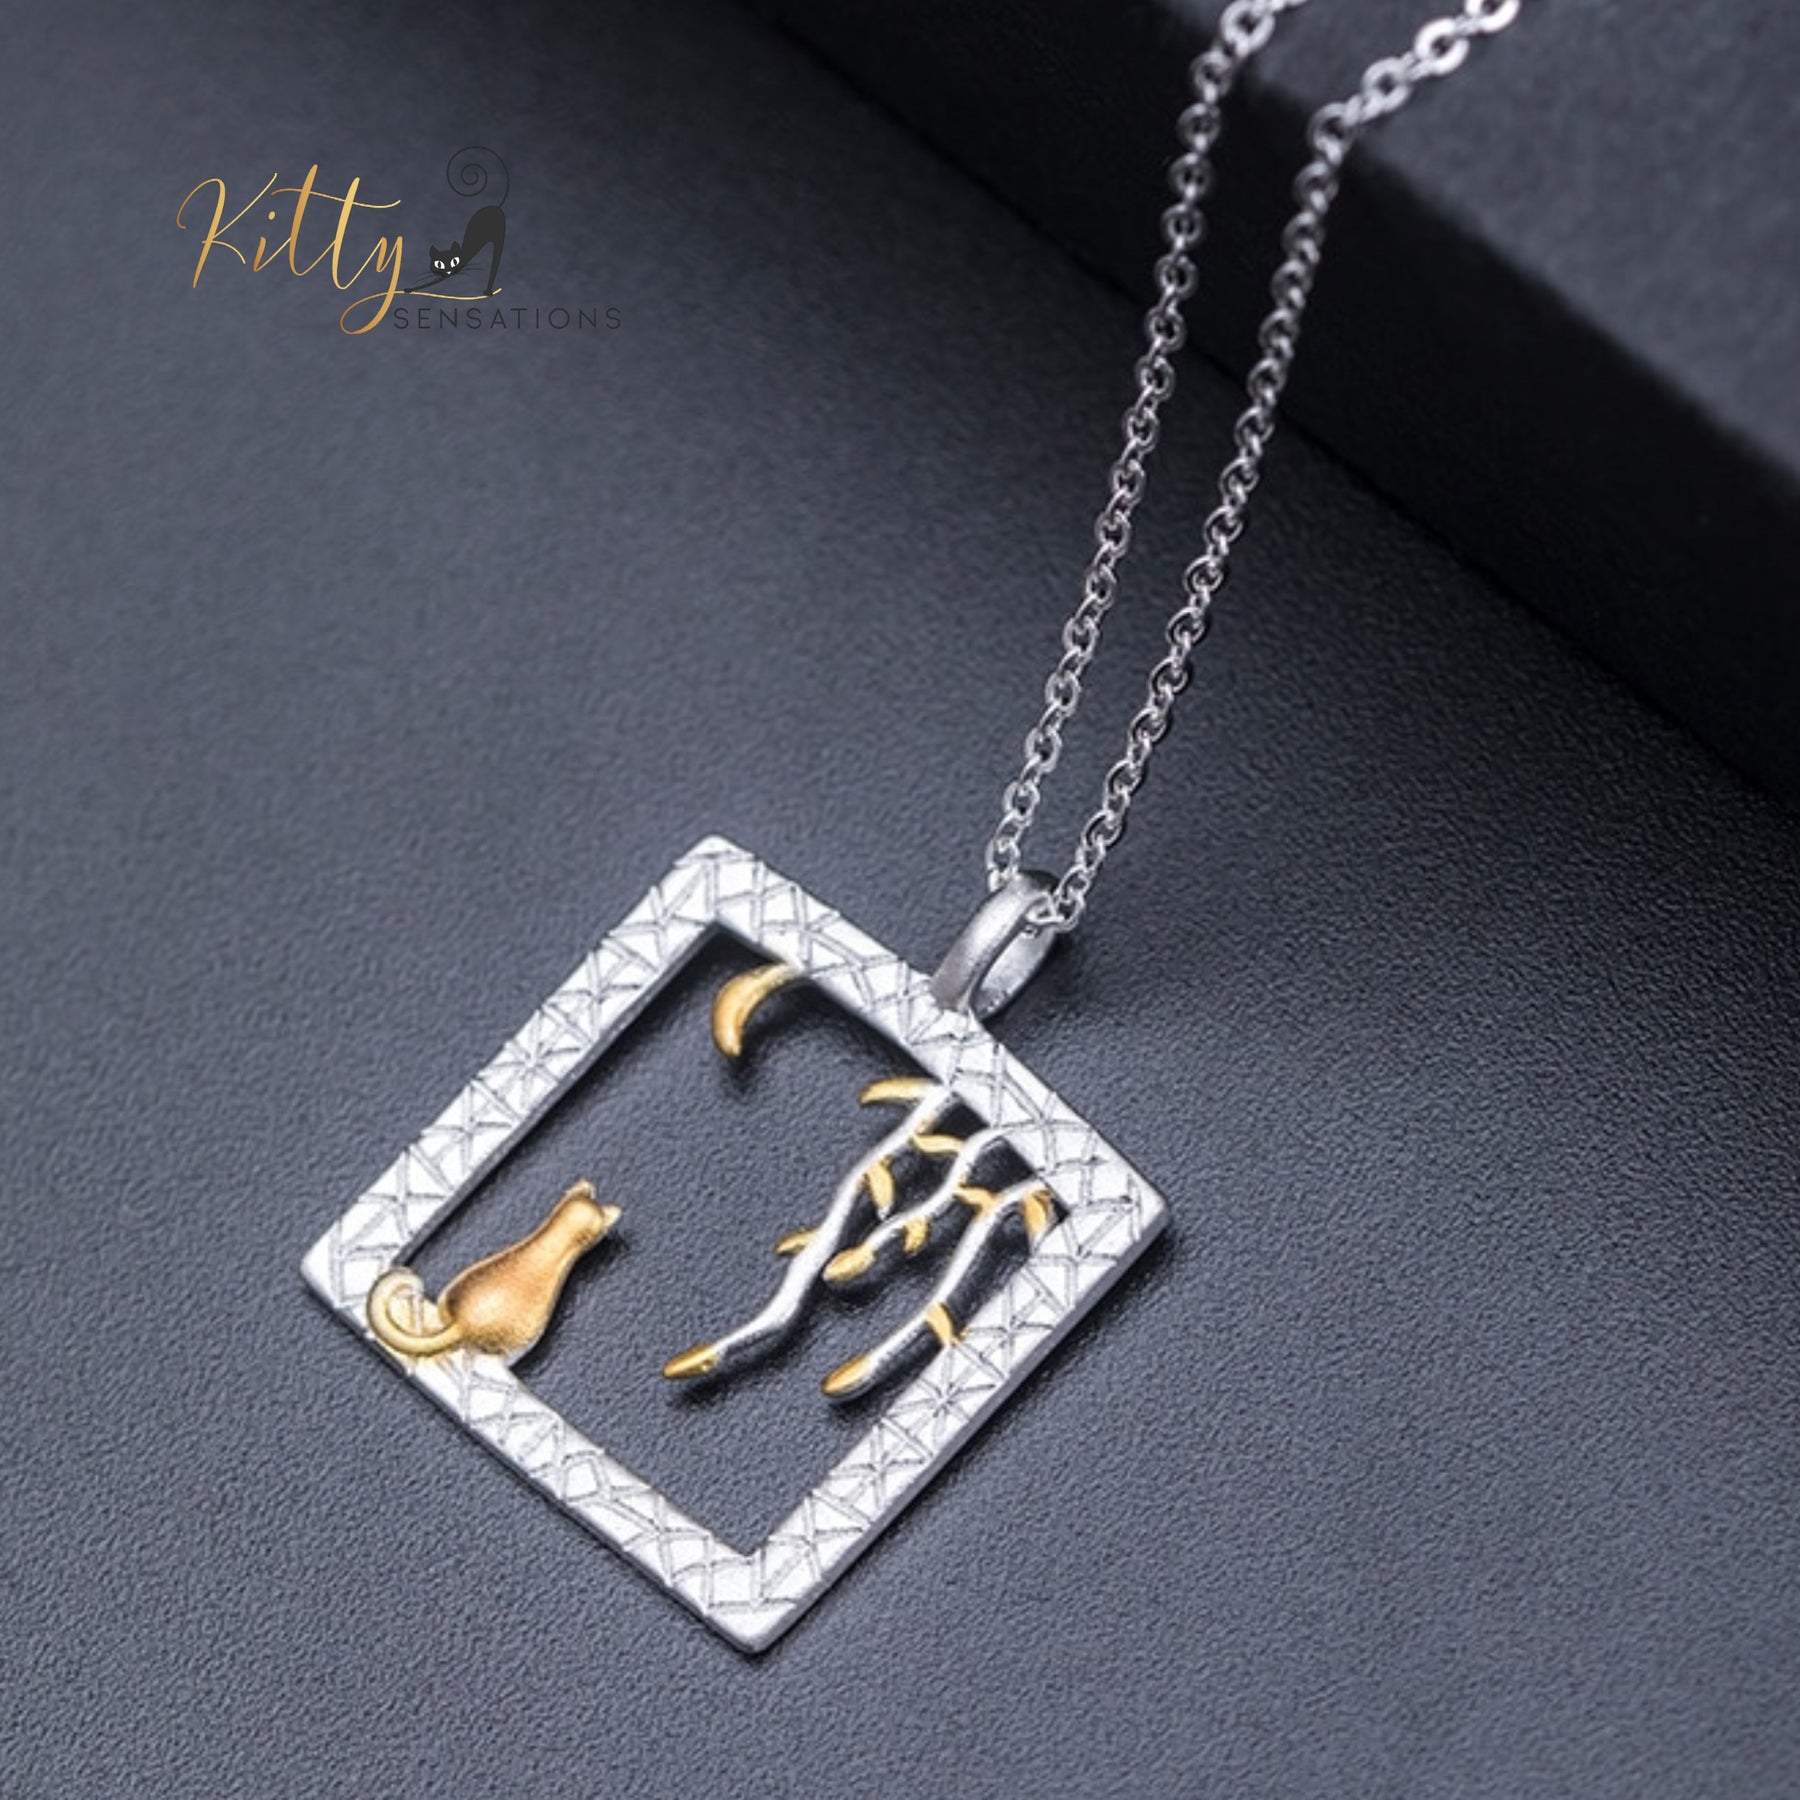 www.KittySensations.com: Golden Moon Kitty in Silver Square Necklace in Solid 925 Sterling Silver (18K Gold Plated) ($80.90): https://www.kittysensations.com/products/golden-moon-kitty-in-silver-square-necklace-in-solid-925-sterling-silver-18k-gold-plated